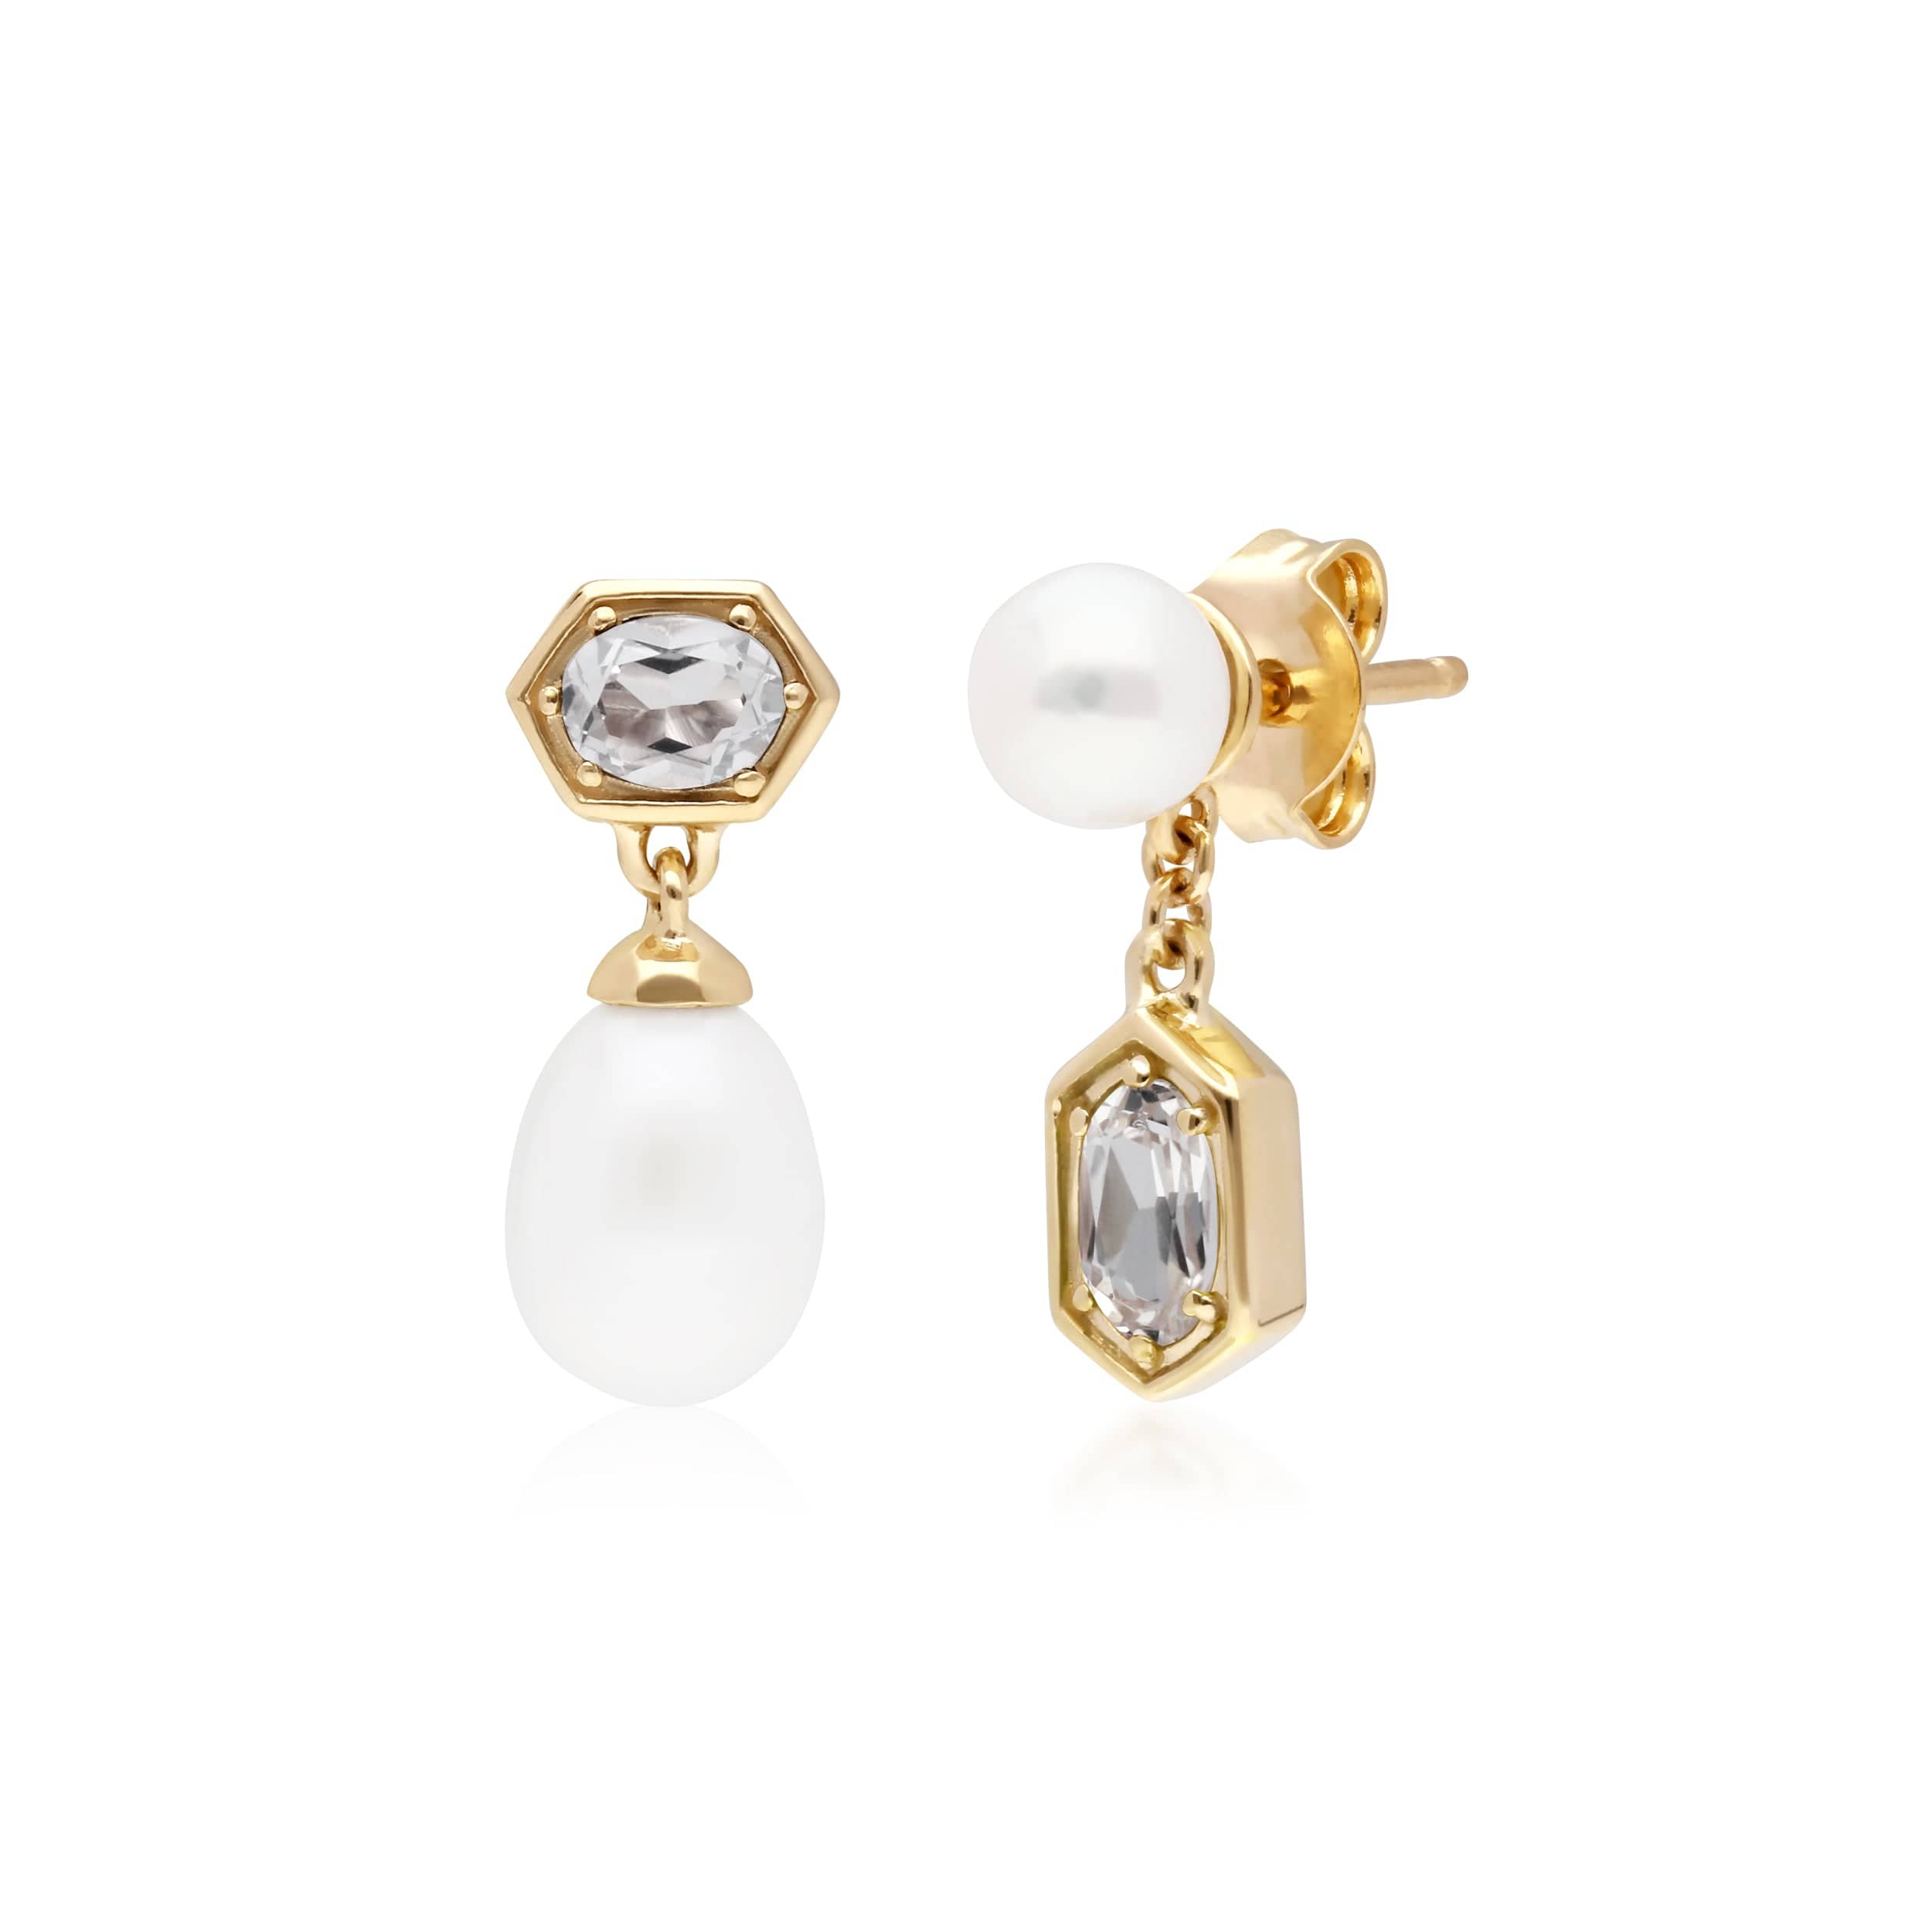 Modern Pearl & White Topaz Mismatched Drop Earrings in Gold Plated Silver - Gemondo